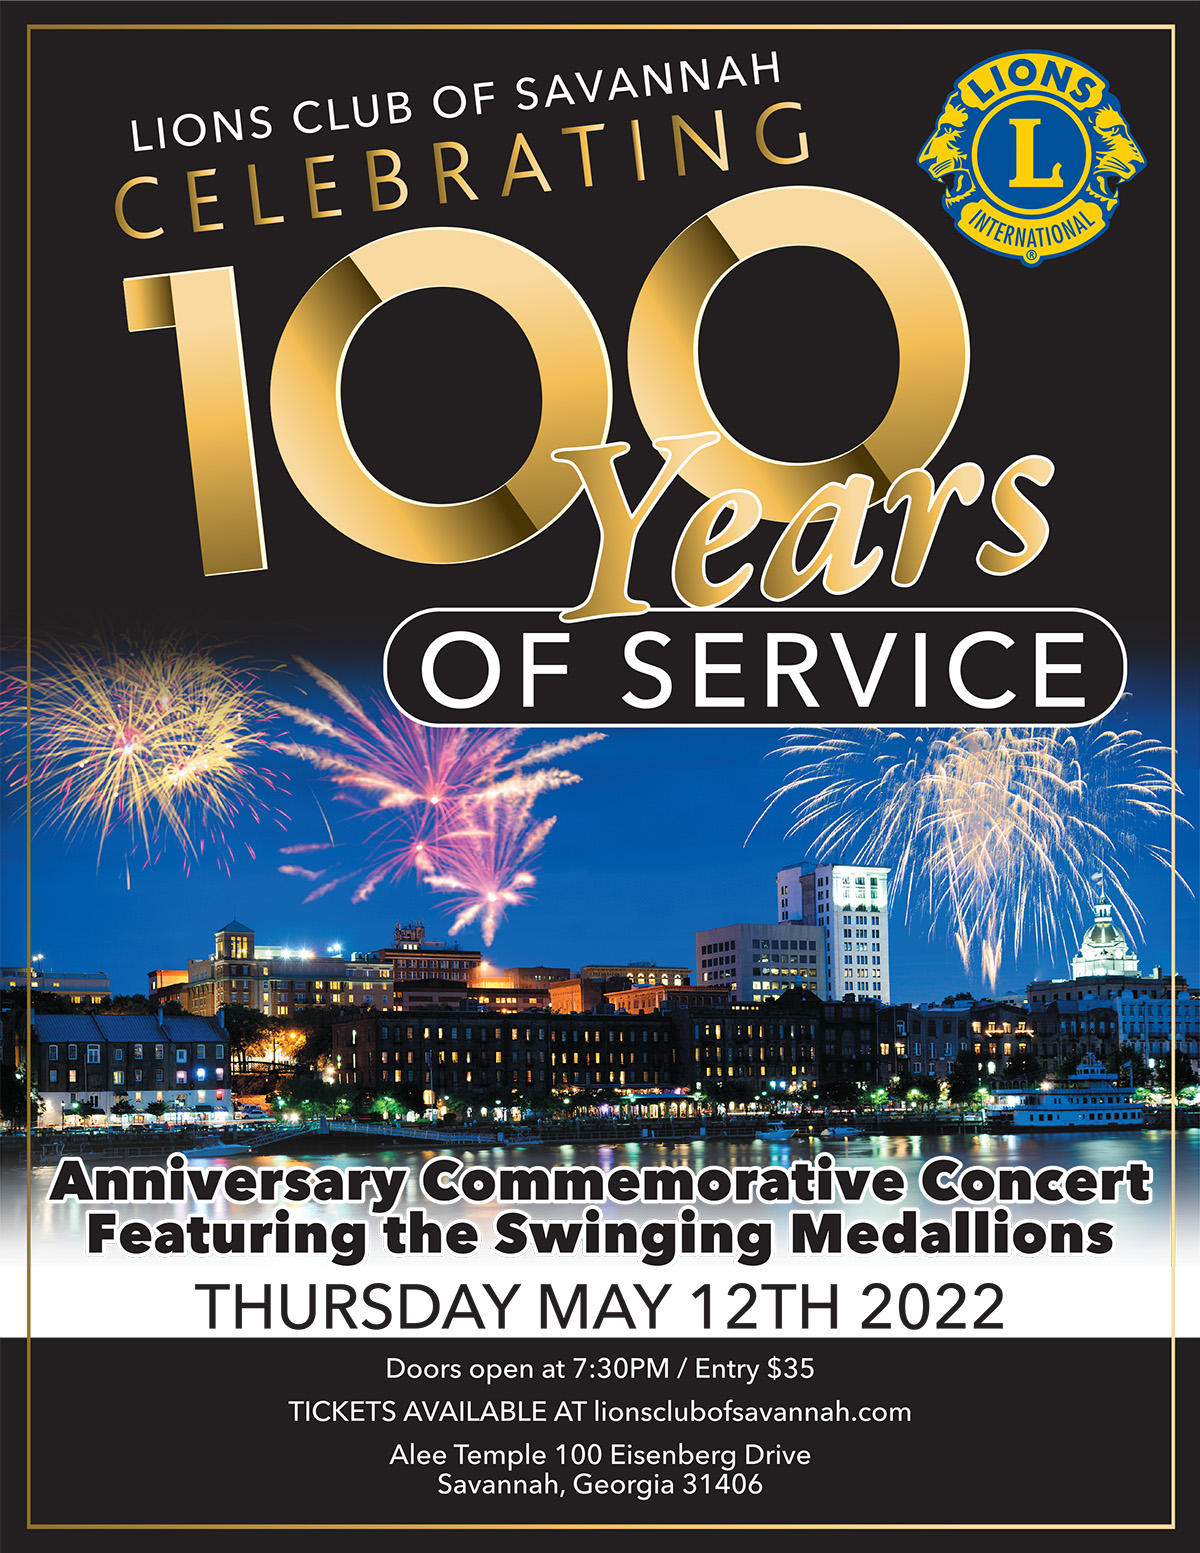 Celebrating 100 Years of Service!